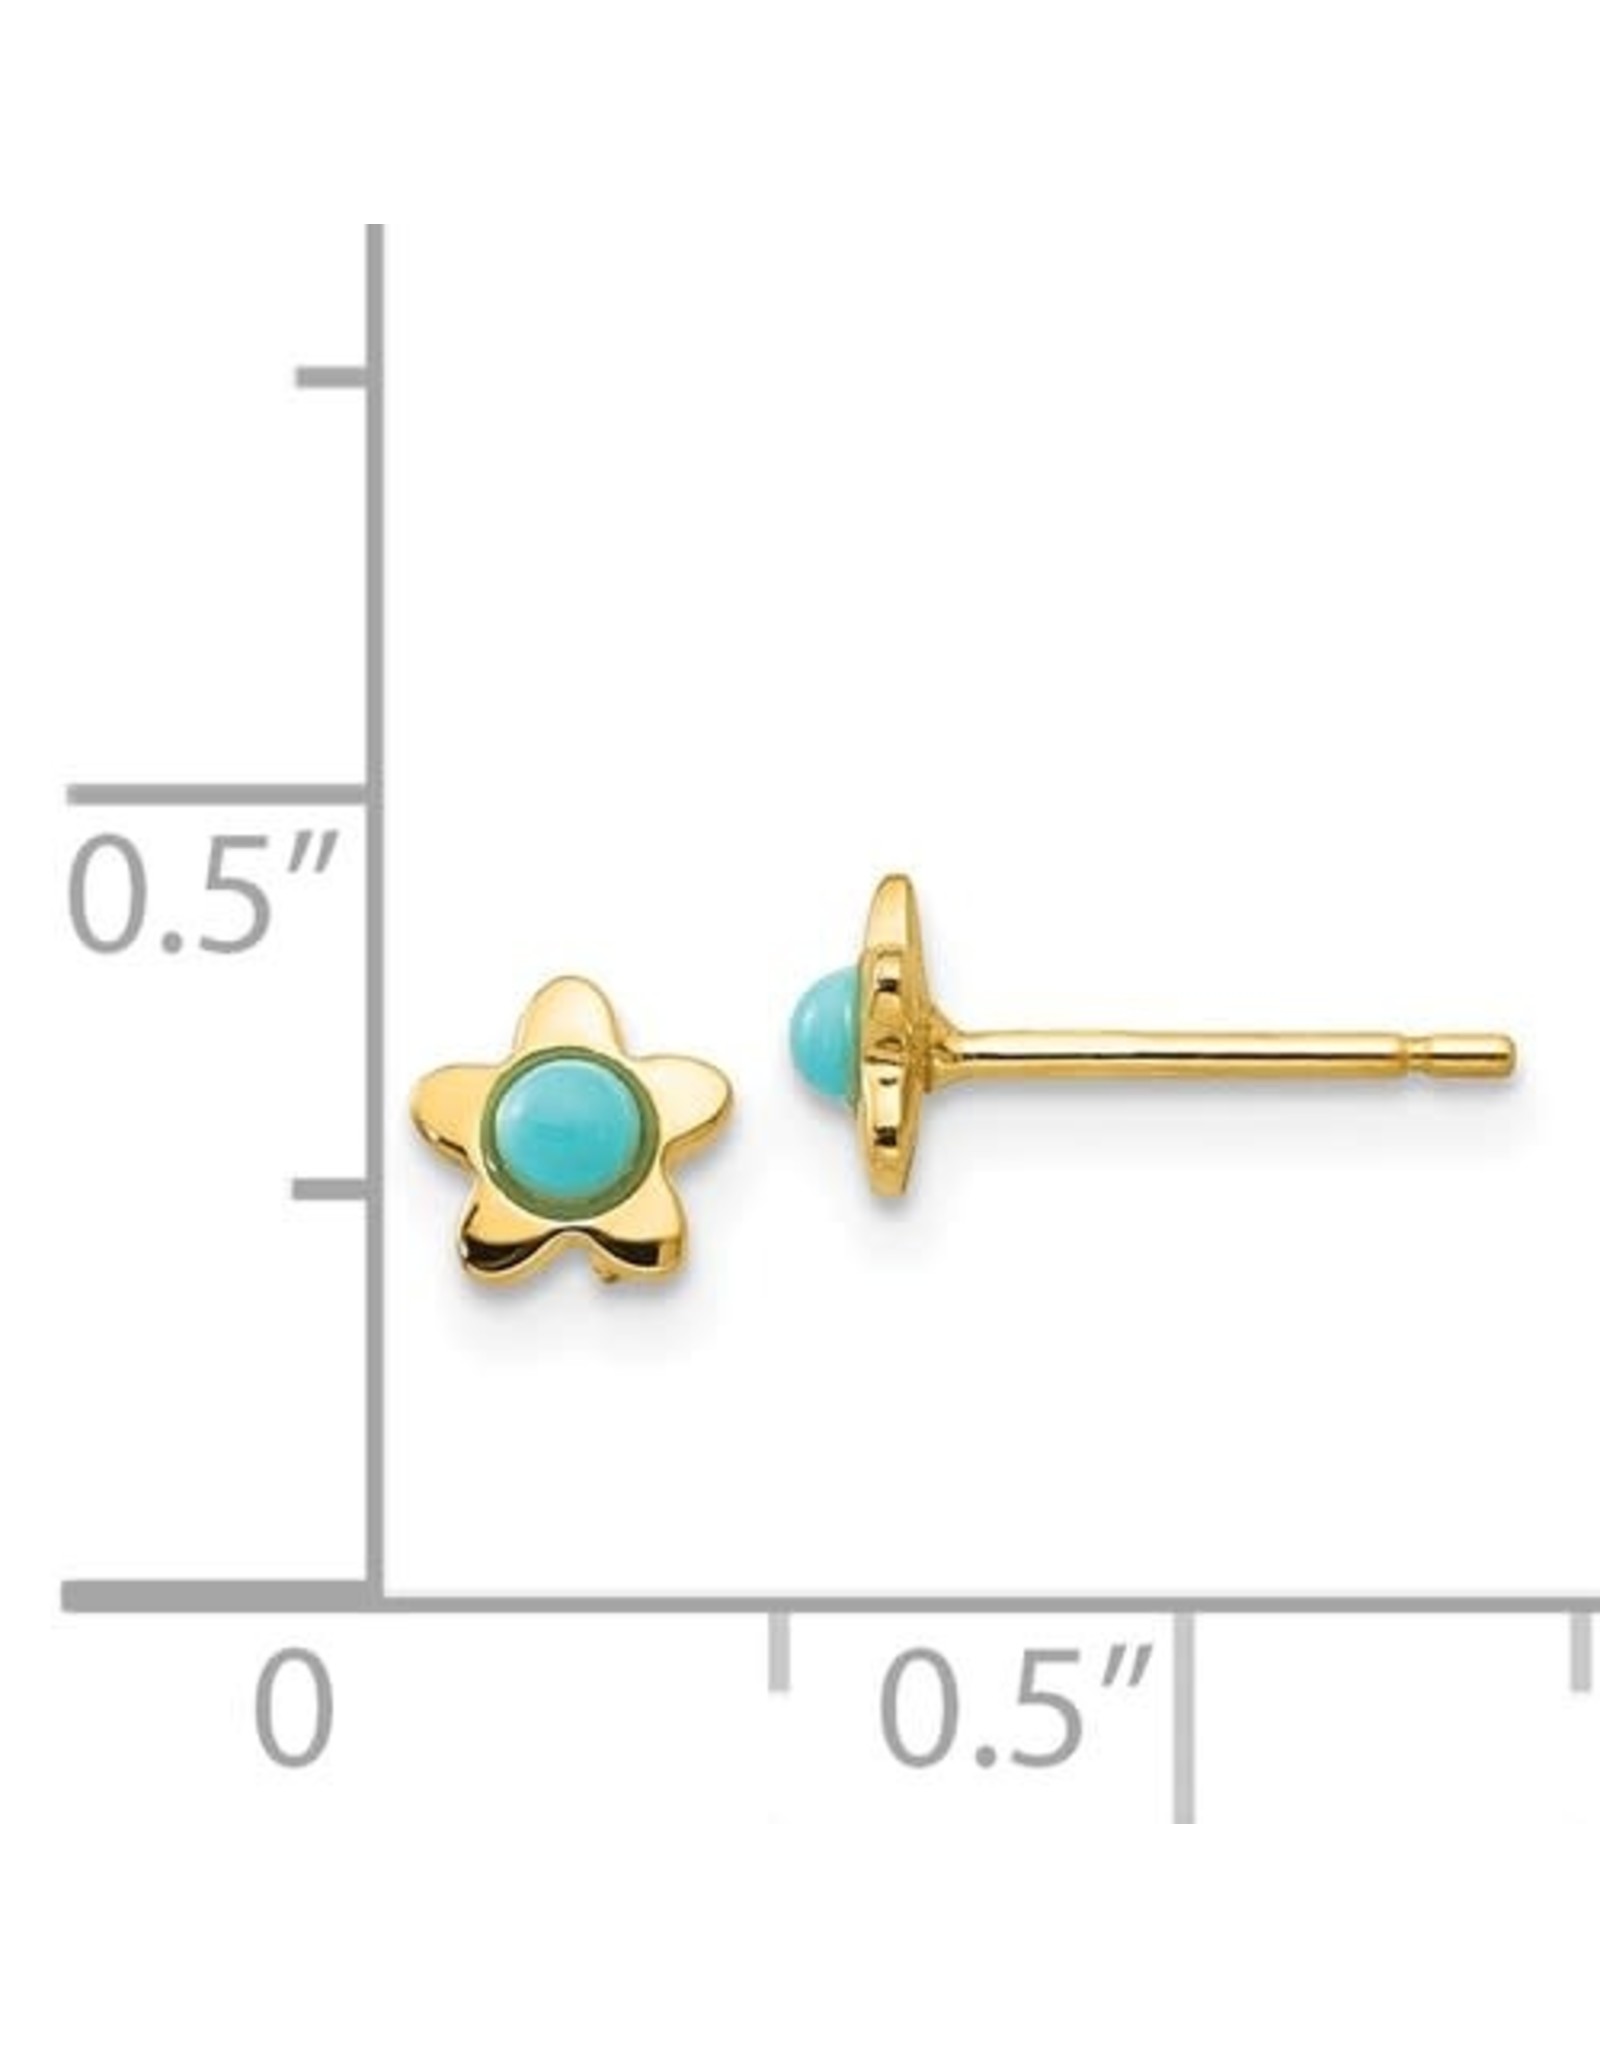 14K Yellow Gold Polished Star and Turquoise Stud Earrings